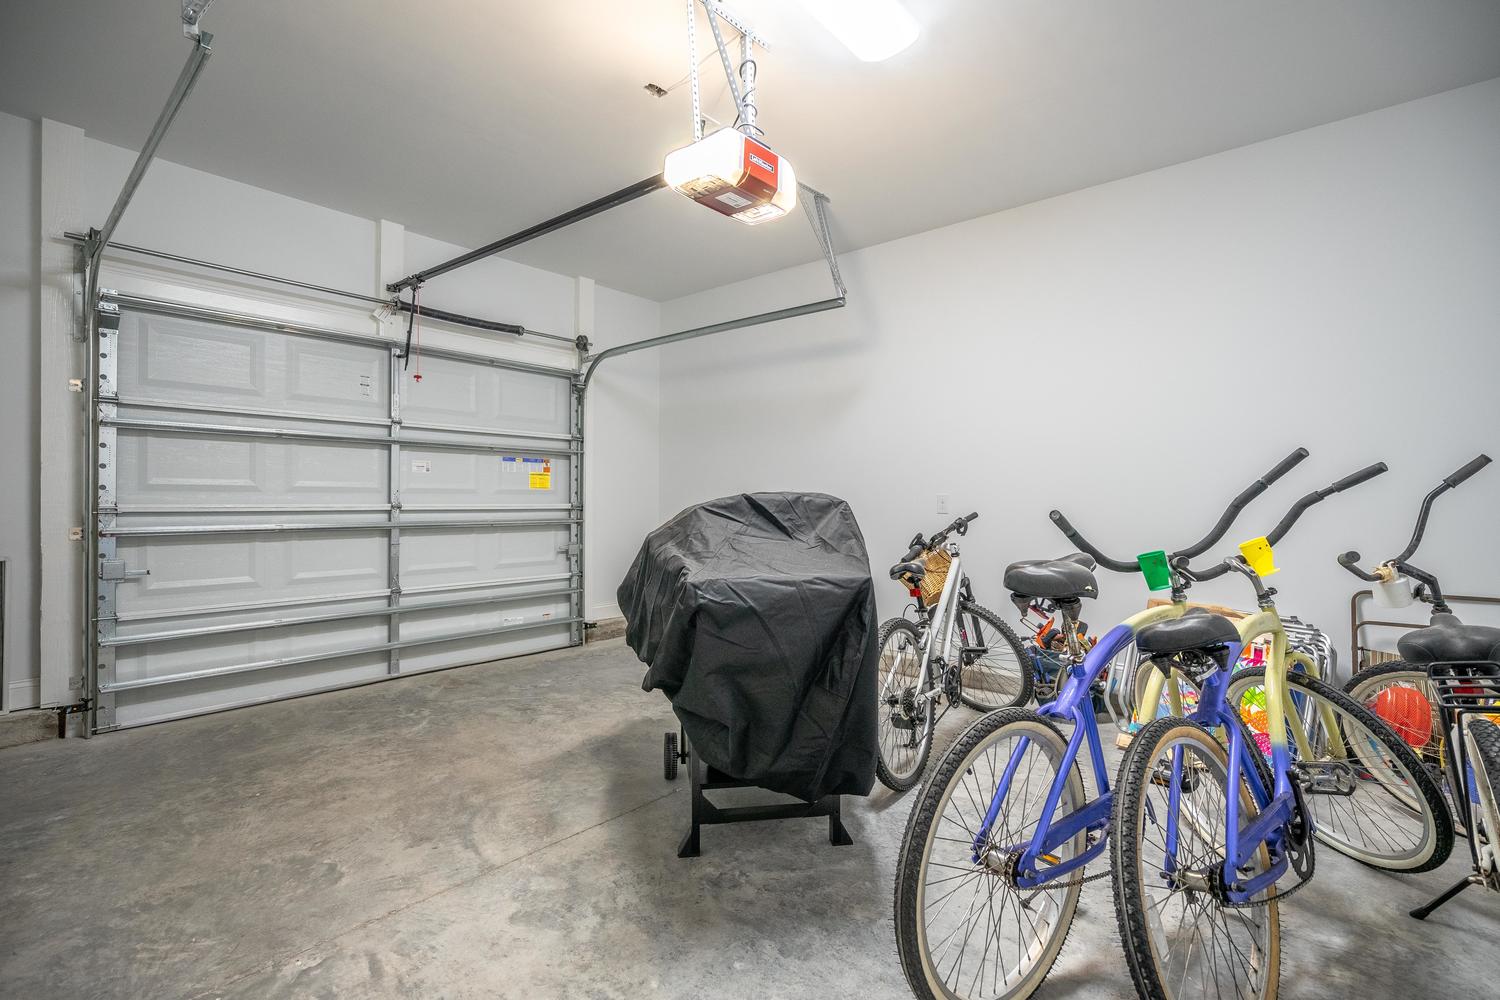 SeaWave-Garage with Grill and Bikes